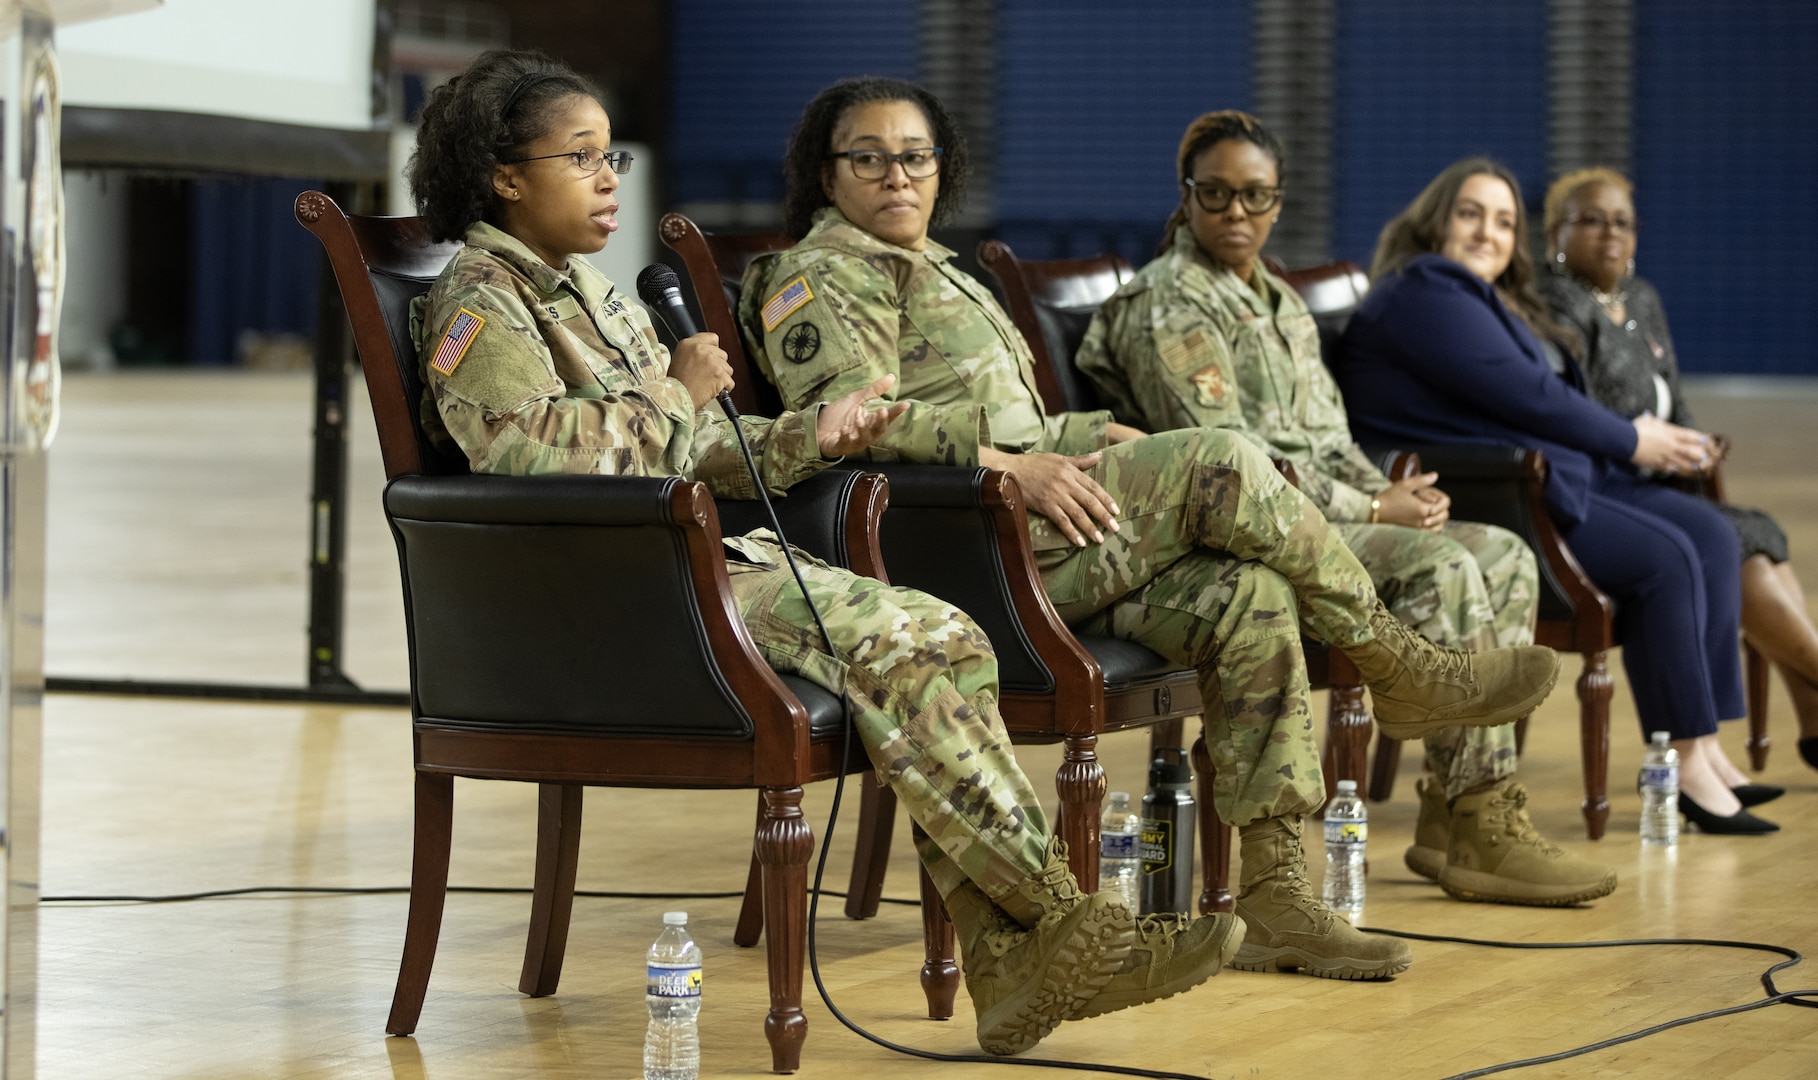 District of Columbia National Guard holds Women Empowerment Panel to commemorate Women’s History Month in the D.C. National Guard Armory, March 28, 2024. The panel features Chief Master Sgt. Naconda Hinton, Senior Enlisted Leader, 113th Medical Group; Capt. Mayauda Bowens, Logistics Support Operations Officer; Chief Warrant Officer 3 Annette Johnson-Tate, DCARNG Officer Strength Manager; Vakisa Bragg, Program Analyst and Ms. Nicole McDermott, Chief of Staff.